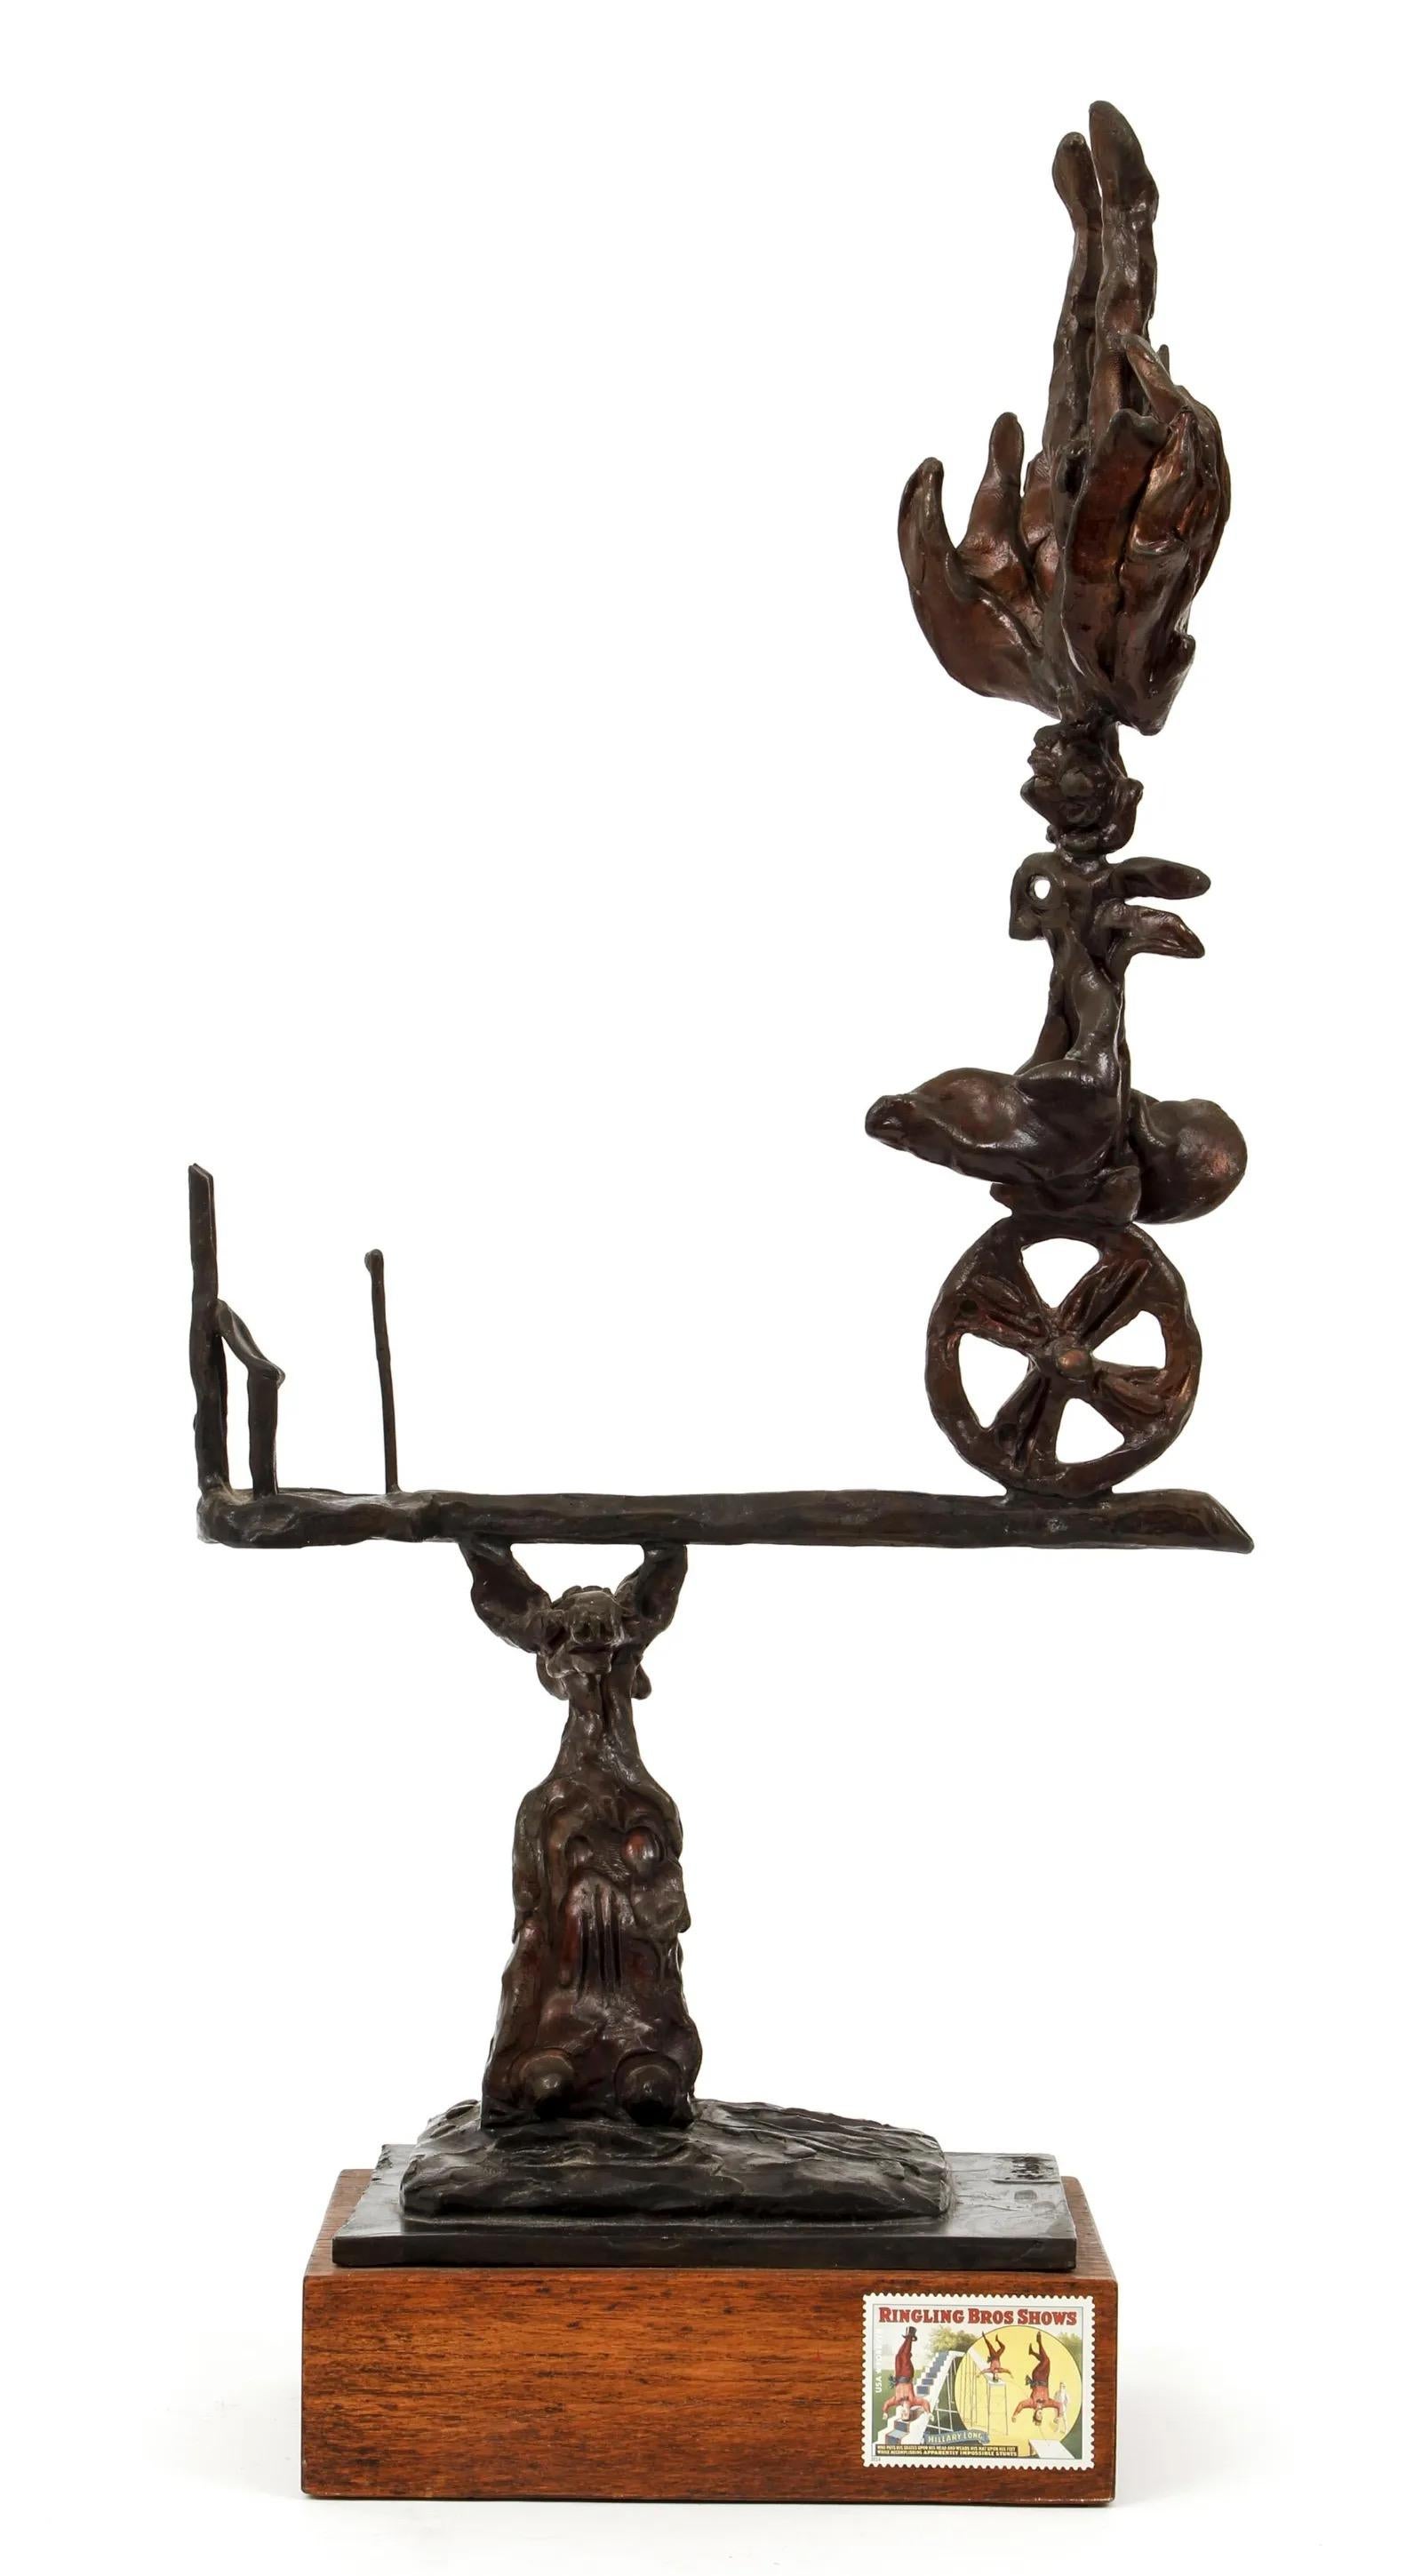 A three-piece set of contemporary sculptures made of cast bronze, brass, copper and glass by Bob La Bobgah. All three sculptures are signed by the artist, whose main focus was Circus Theme. These are black tone. 

Measures: 9 x 7.5 x 5.5